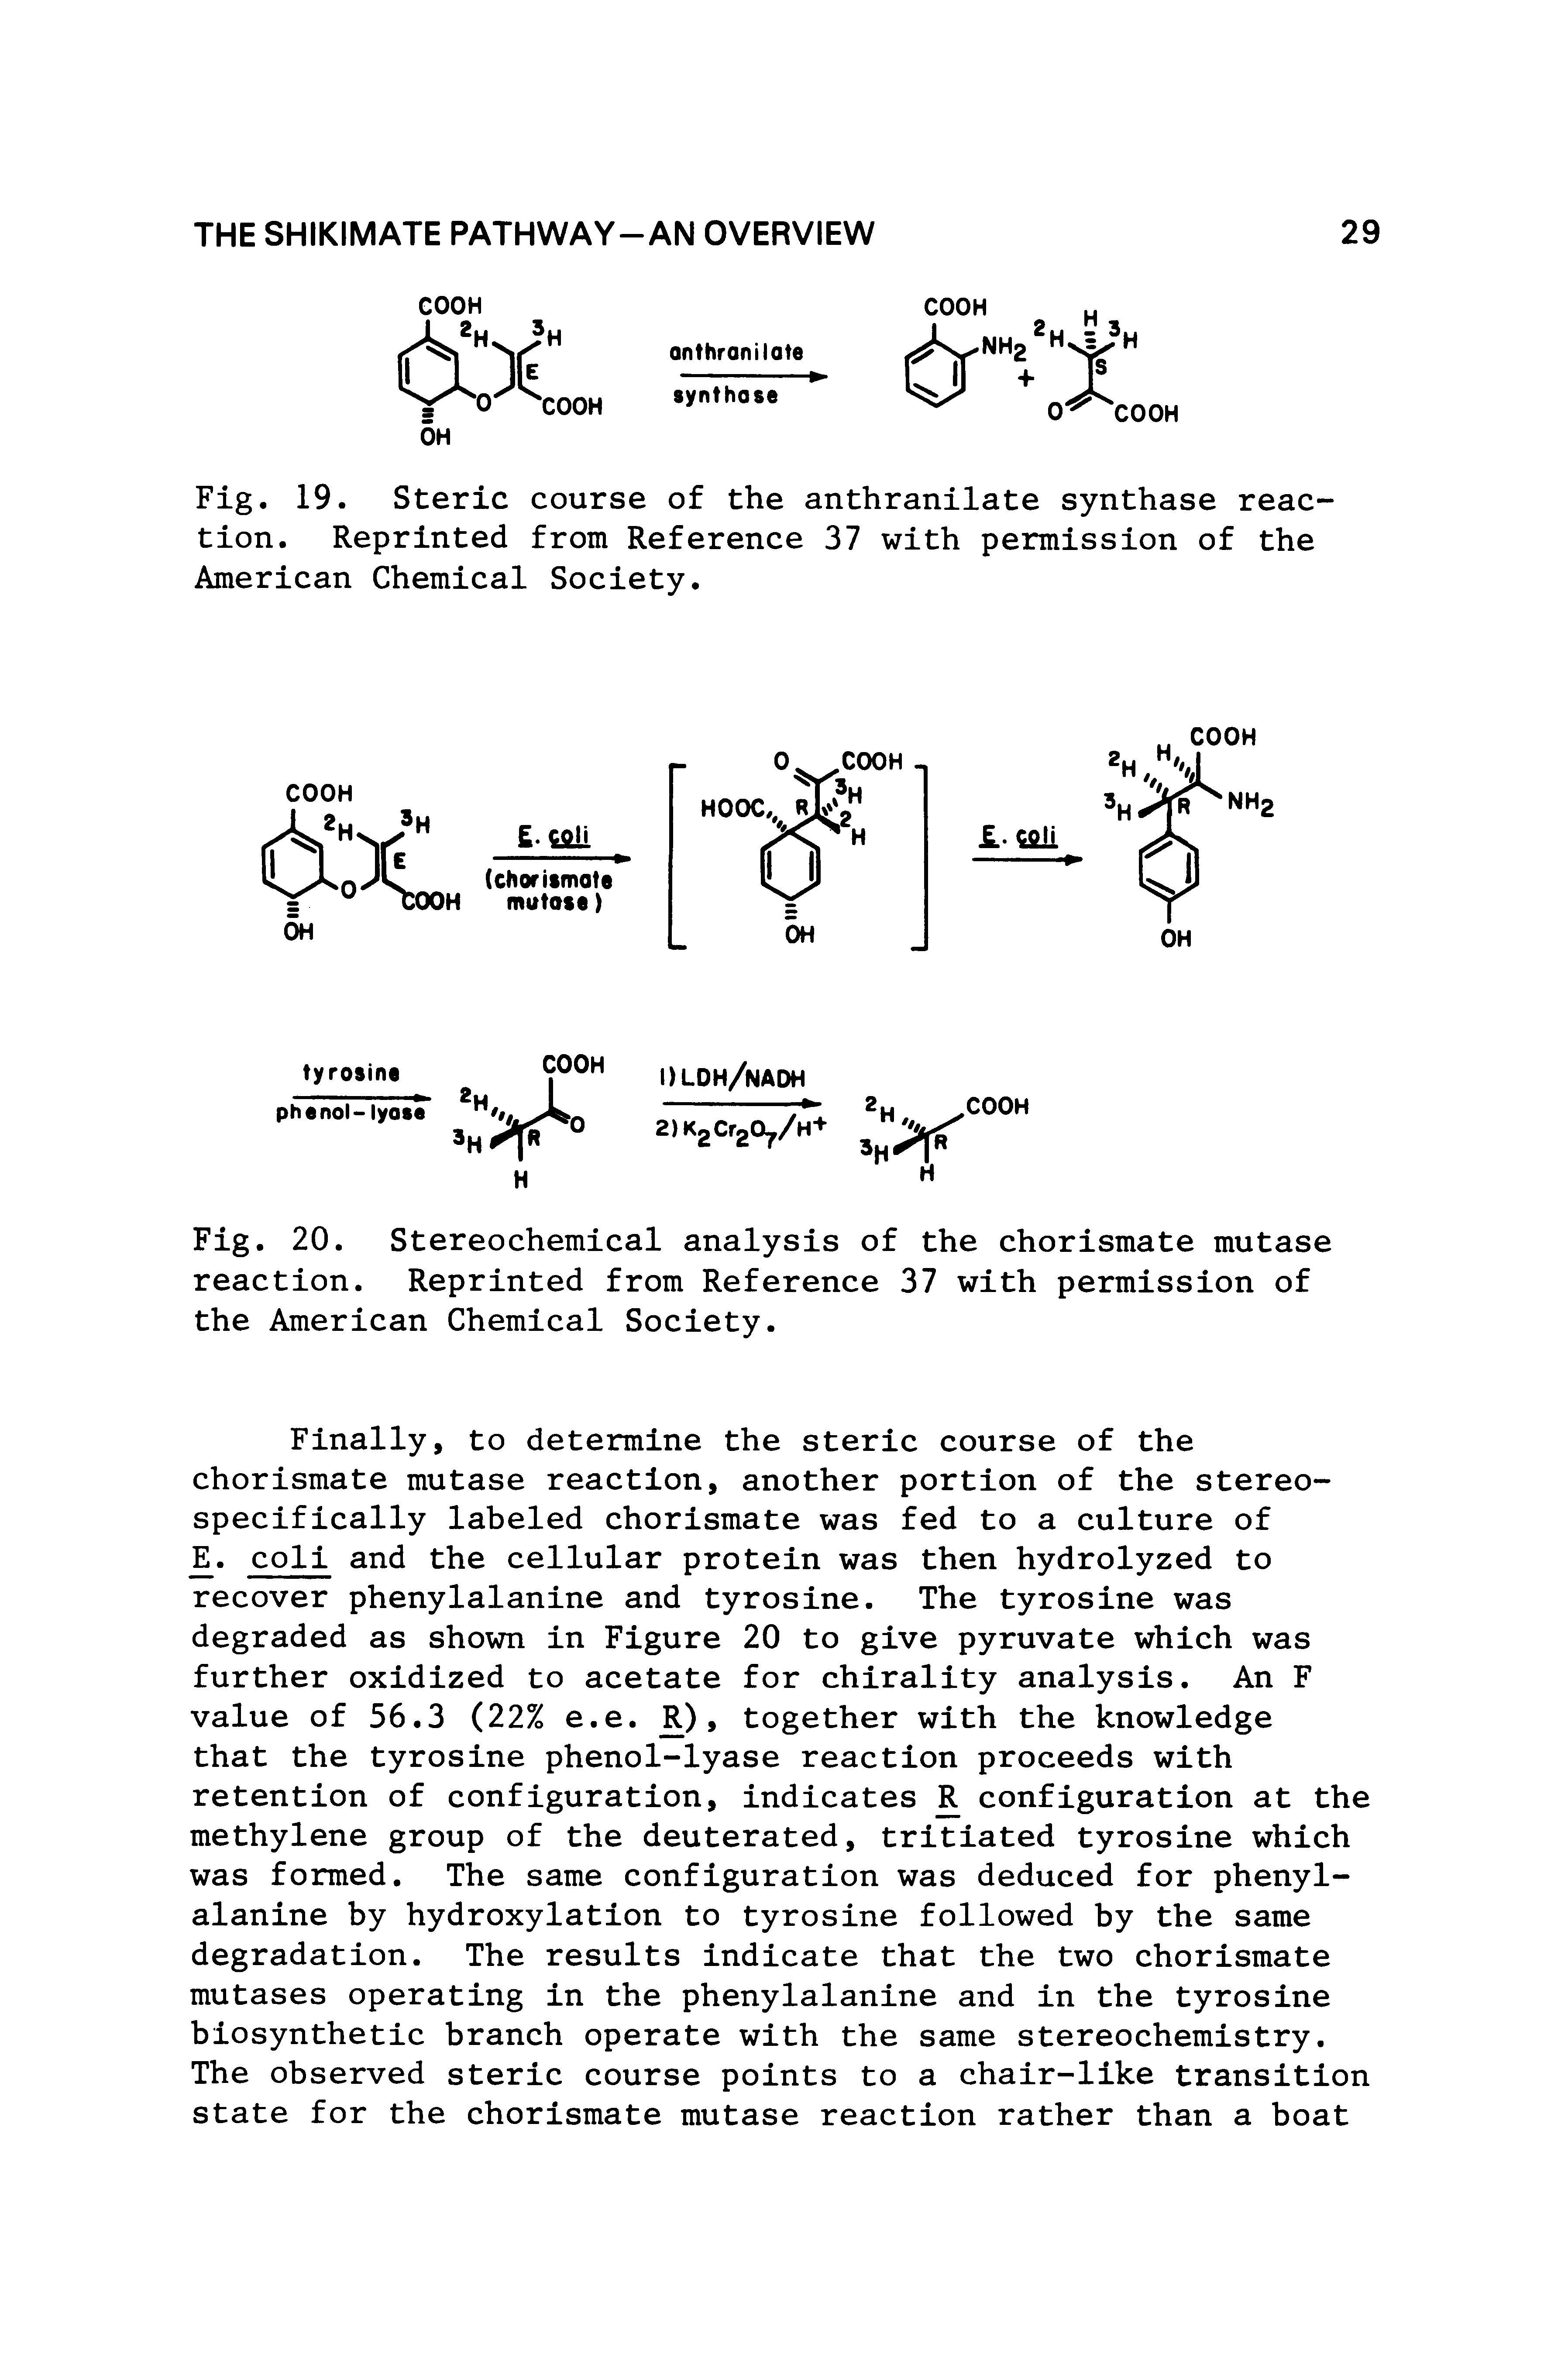 Fig. 19. Steric course of the anthranilate synthase reaction. Reprinted from Reference 37 with permission of the American Chemical Society.